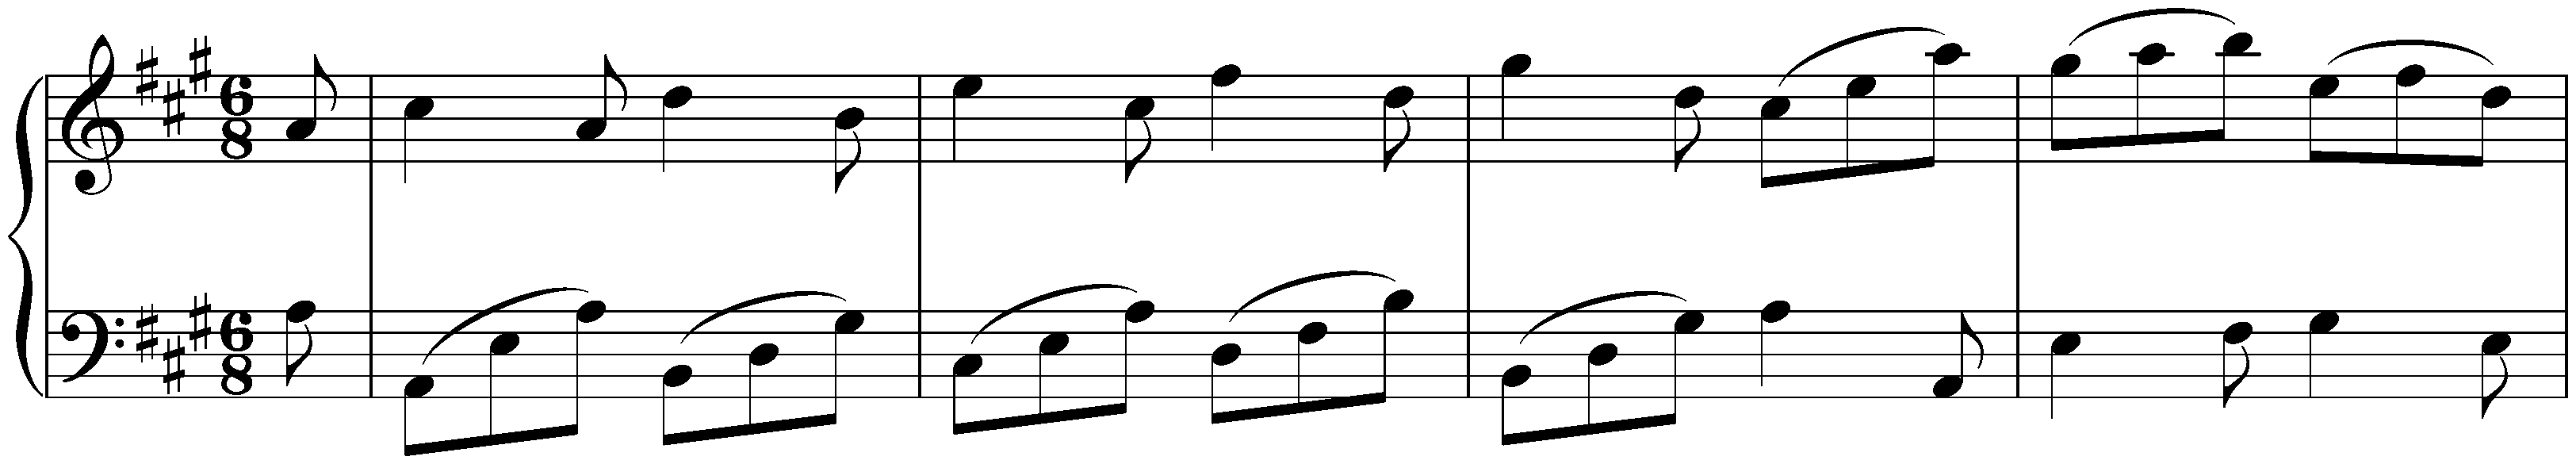 Suite in A major, BWV 832; 5. Gigue